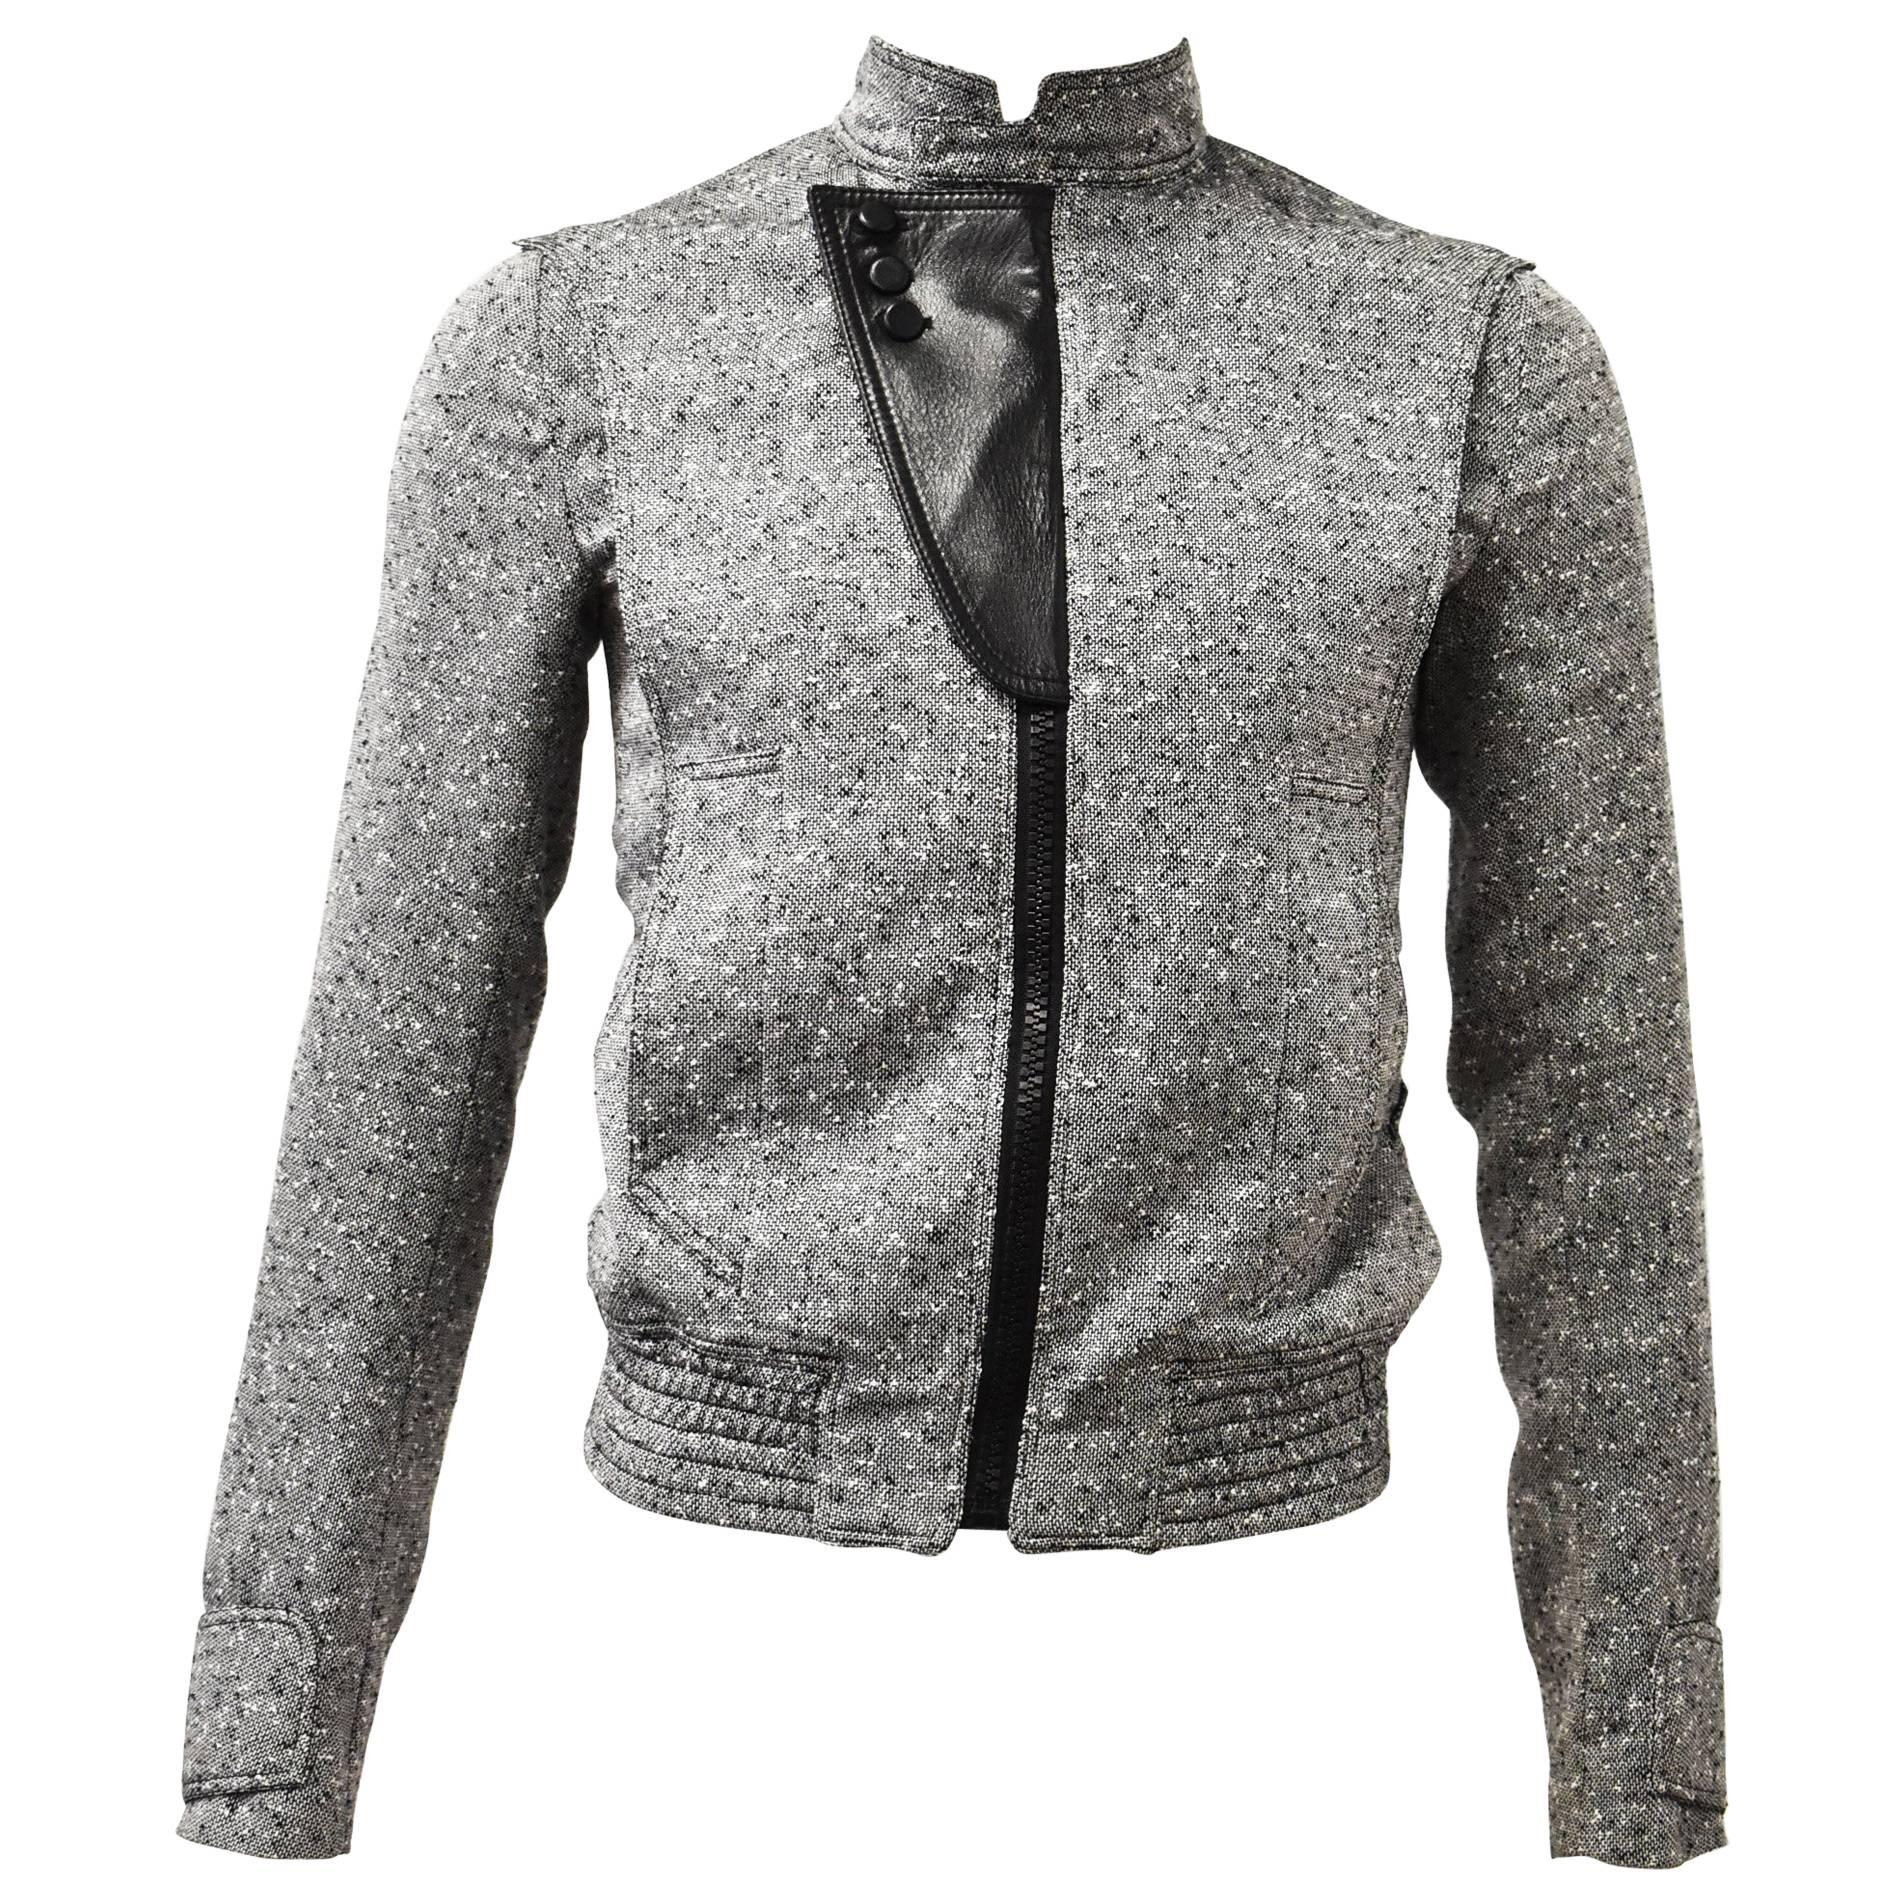 Dior Hedi Slimane Grey Cropped Wool and Silk Jacket with Leather Panel Details For Sale